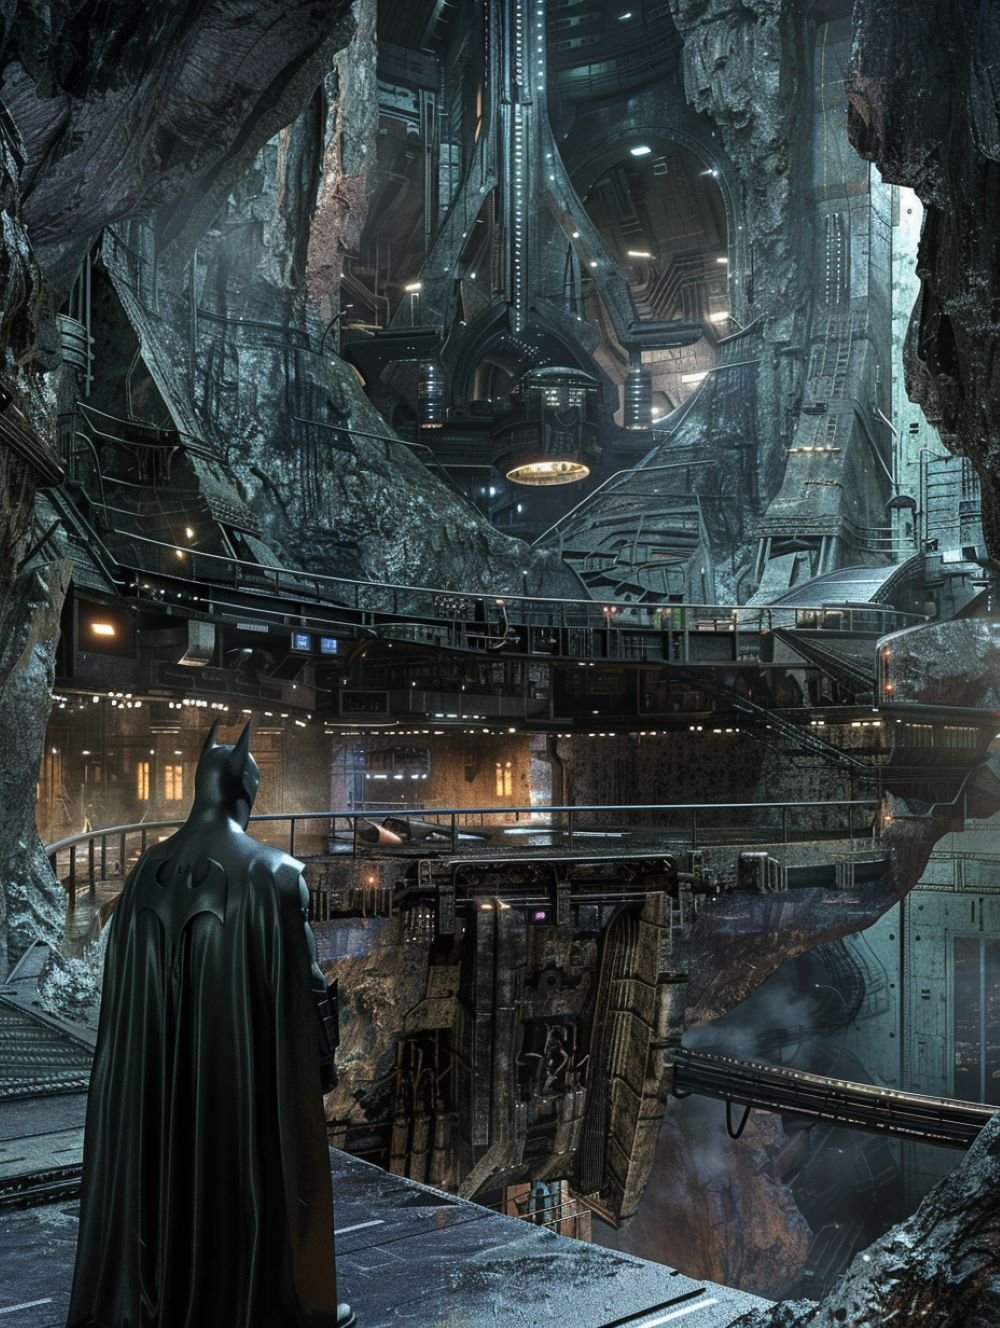 Batman is standing in front of the Batcave